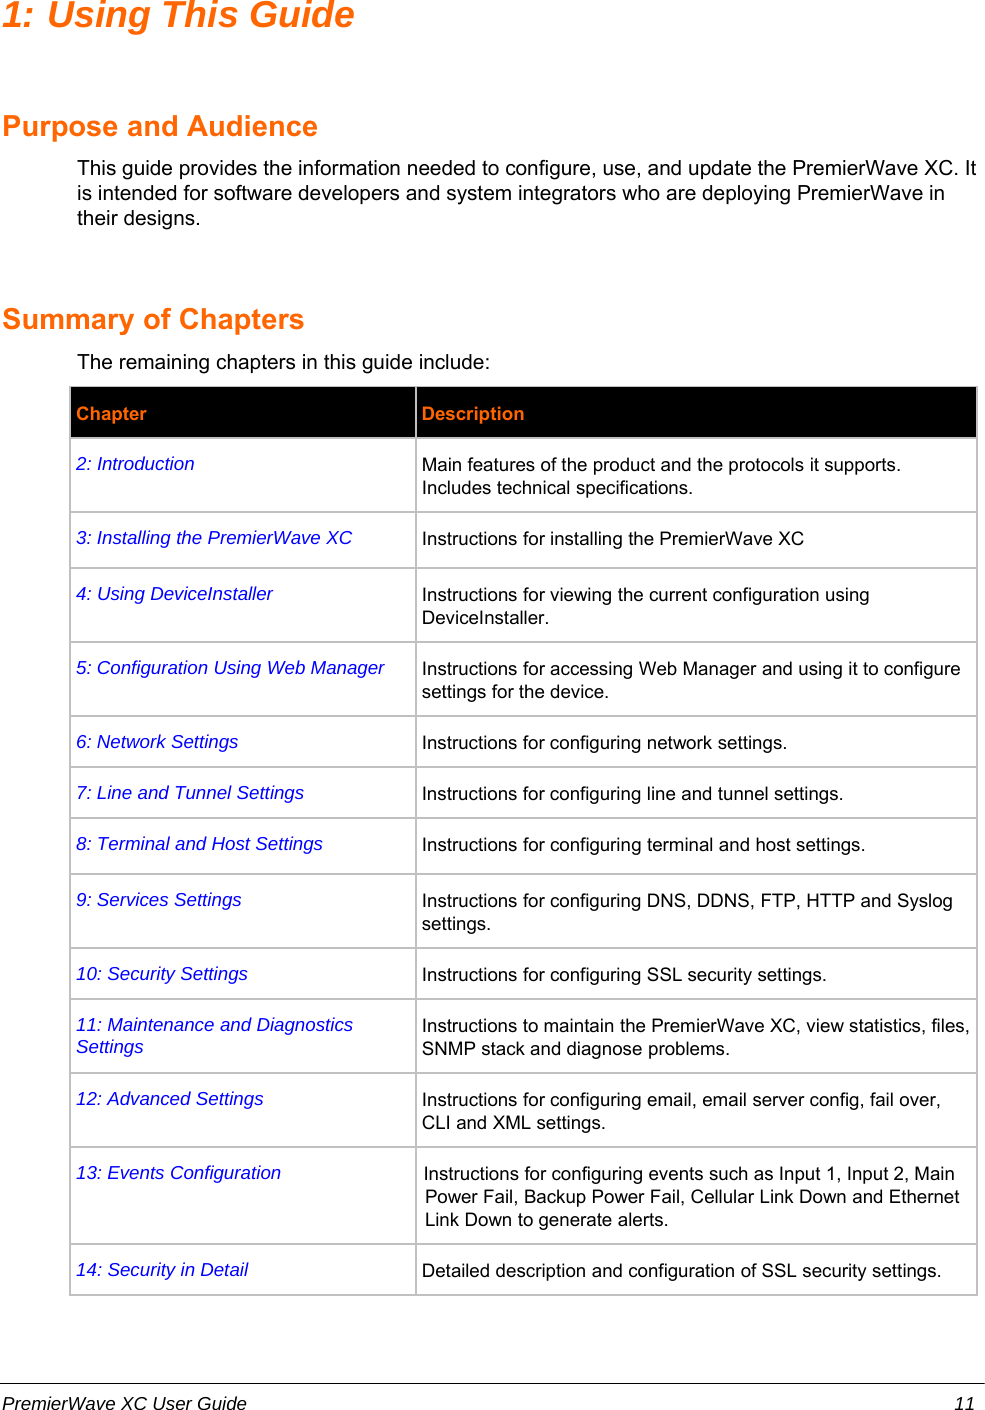 1: Using This GuidePurpose and AudienceThis guide provides the information needed to configure, use, and update the PremierWave XC. Itis intended for software developers and system integrators who are deploying PremierWave intheir designs.Summary of ChaptersThe remaining chapters in this guide include:Chapter Description2: Introduction Main features of the product and the protocols it supports.Includes technical specifications. 3: Installing the PremierWave XC Instructions for installing the PremierWave XC4: Using DeviceInstaller Instructions for viewing the current configuration usingDeviceInstaller.5: Configuration Using Web Manager Instructions for accessing Web Manager and using it to configuresettings for the device.6: Network Settings Instructions for configuring network settings.7: Line and Tunnel Settings Instructions for configuring line and tunnel settings.8: Terminal and Host Settings Instructions for configuring terminal and host settings.9: Services Settings Instructions for configuring DNS, DDNS, FTP, HTTP and Syslogsettings.10: Security Settings Instructions for configuring SSL security settings. 11: Maintenance and DiagnosticsSettings Instructions to maintain the PremierWave XC, view statistics, files,SNMP stack and diagnose problems.12: Advanced Settings Instructions for configuring email, email server config, fail over,CLI and XML settings.13: Events Configuration Instructions for configuring events such as Input 1, Input 2, MainPower Fail, Backup Power Fail, Cellular Link Down and EthernetLink Down to generate alerts.14: Security in Detail Detailed description and configuration of SSL security settings.PremierWave XC User Guide 11